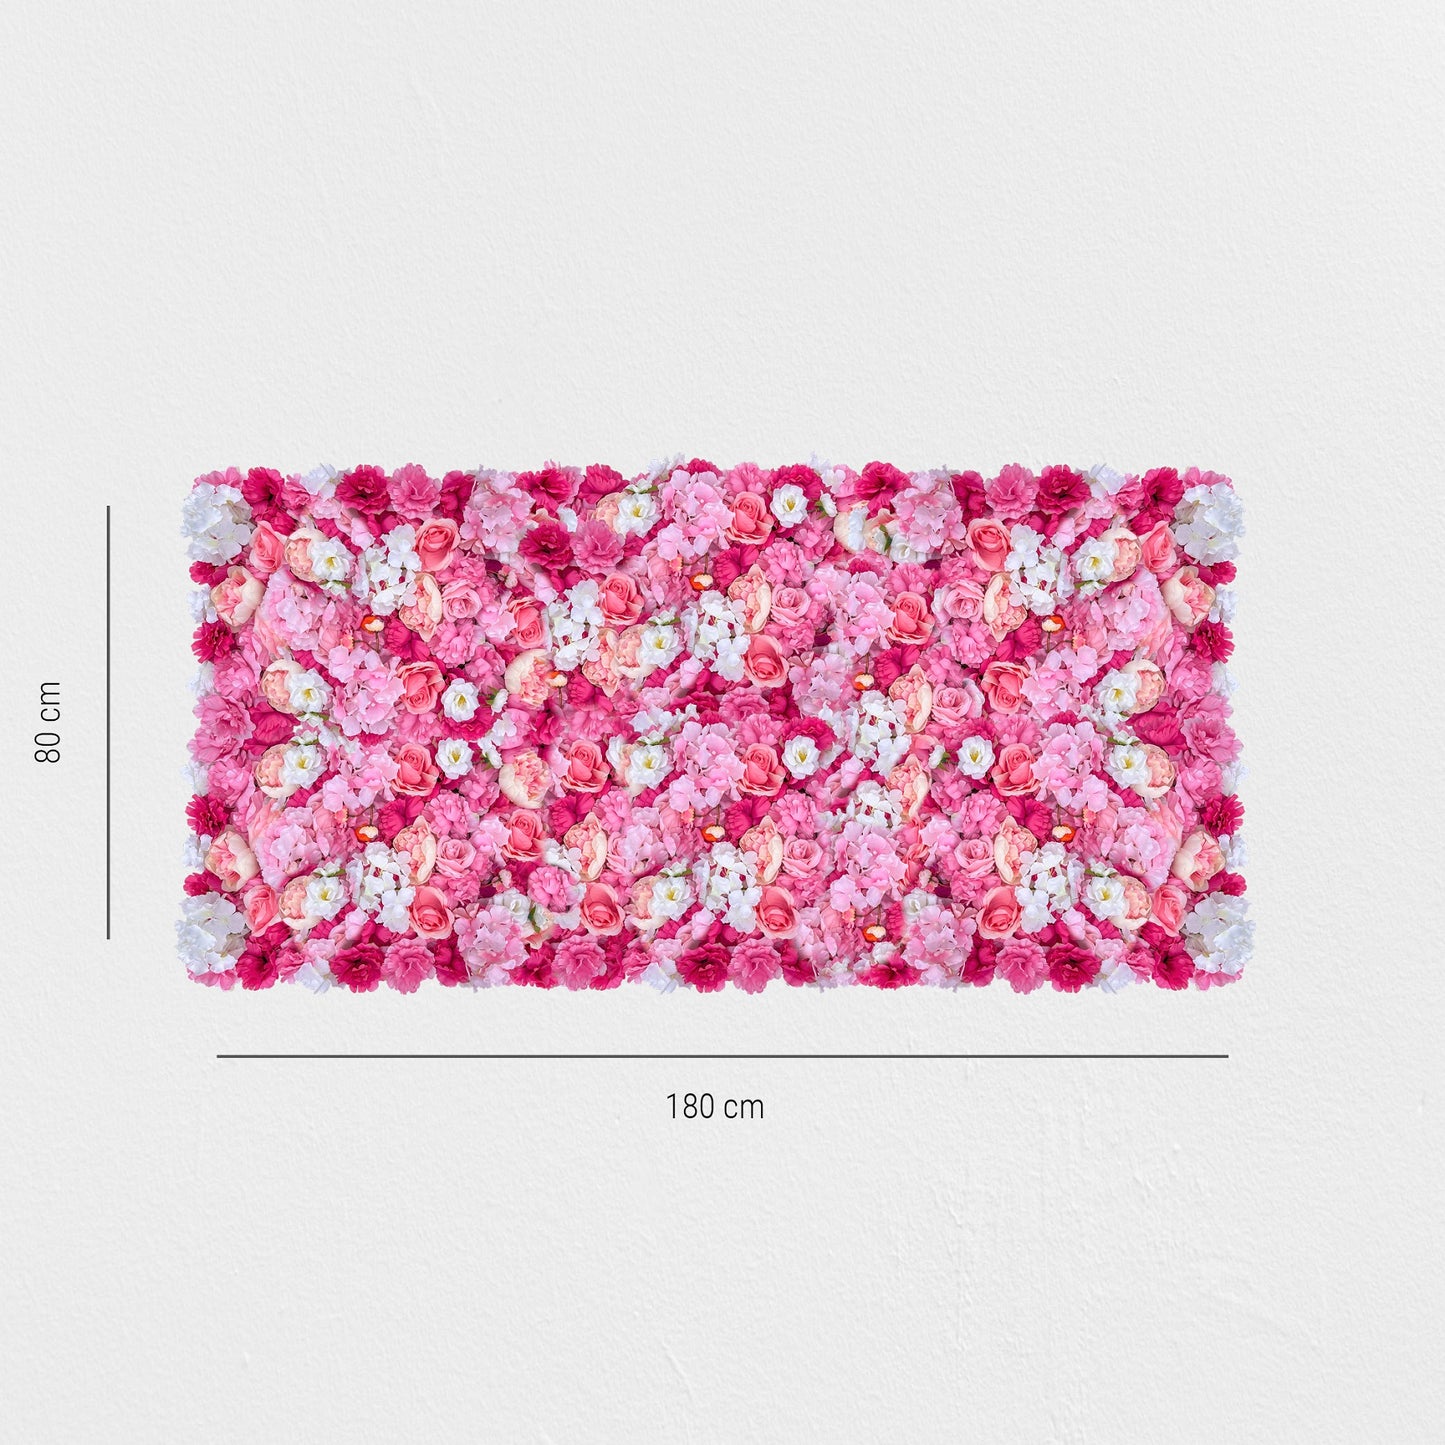 Flower wall "MISS ROYAL" made of Realtouch artificial plants